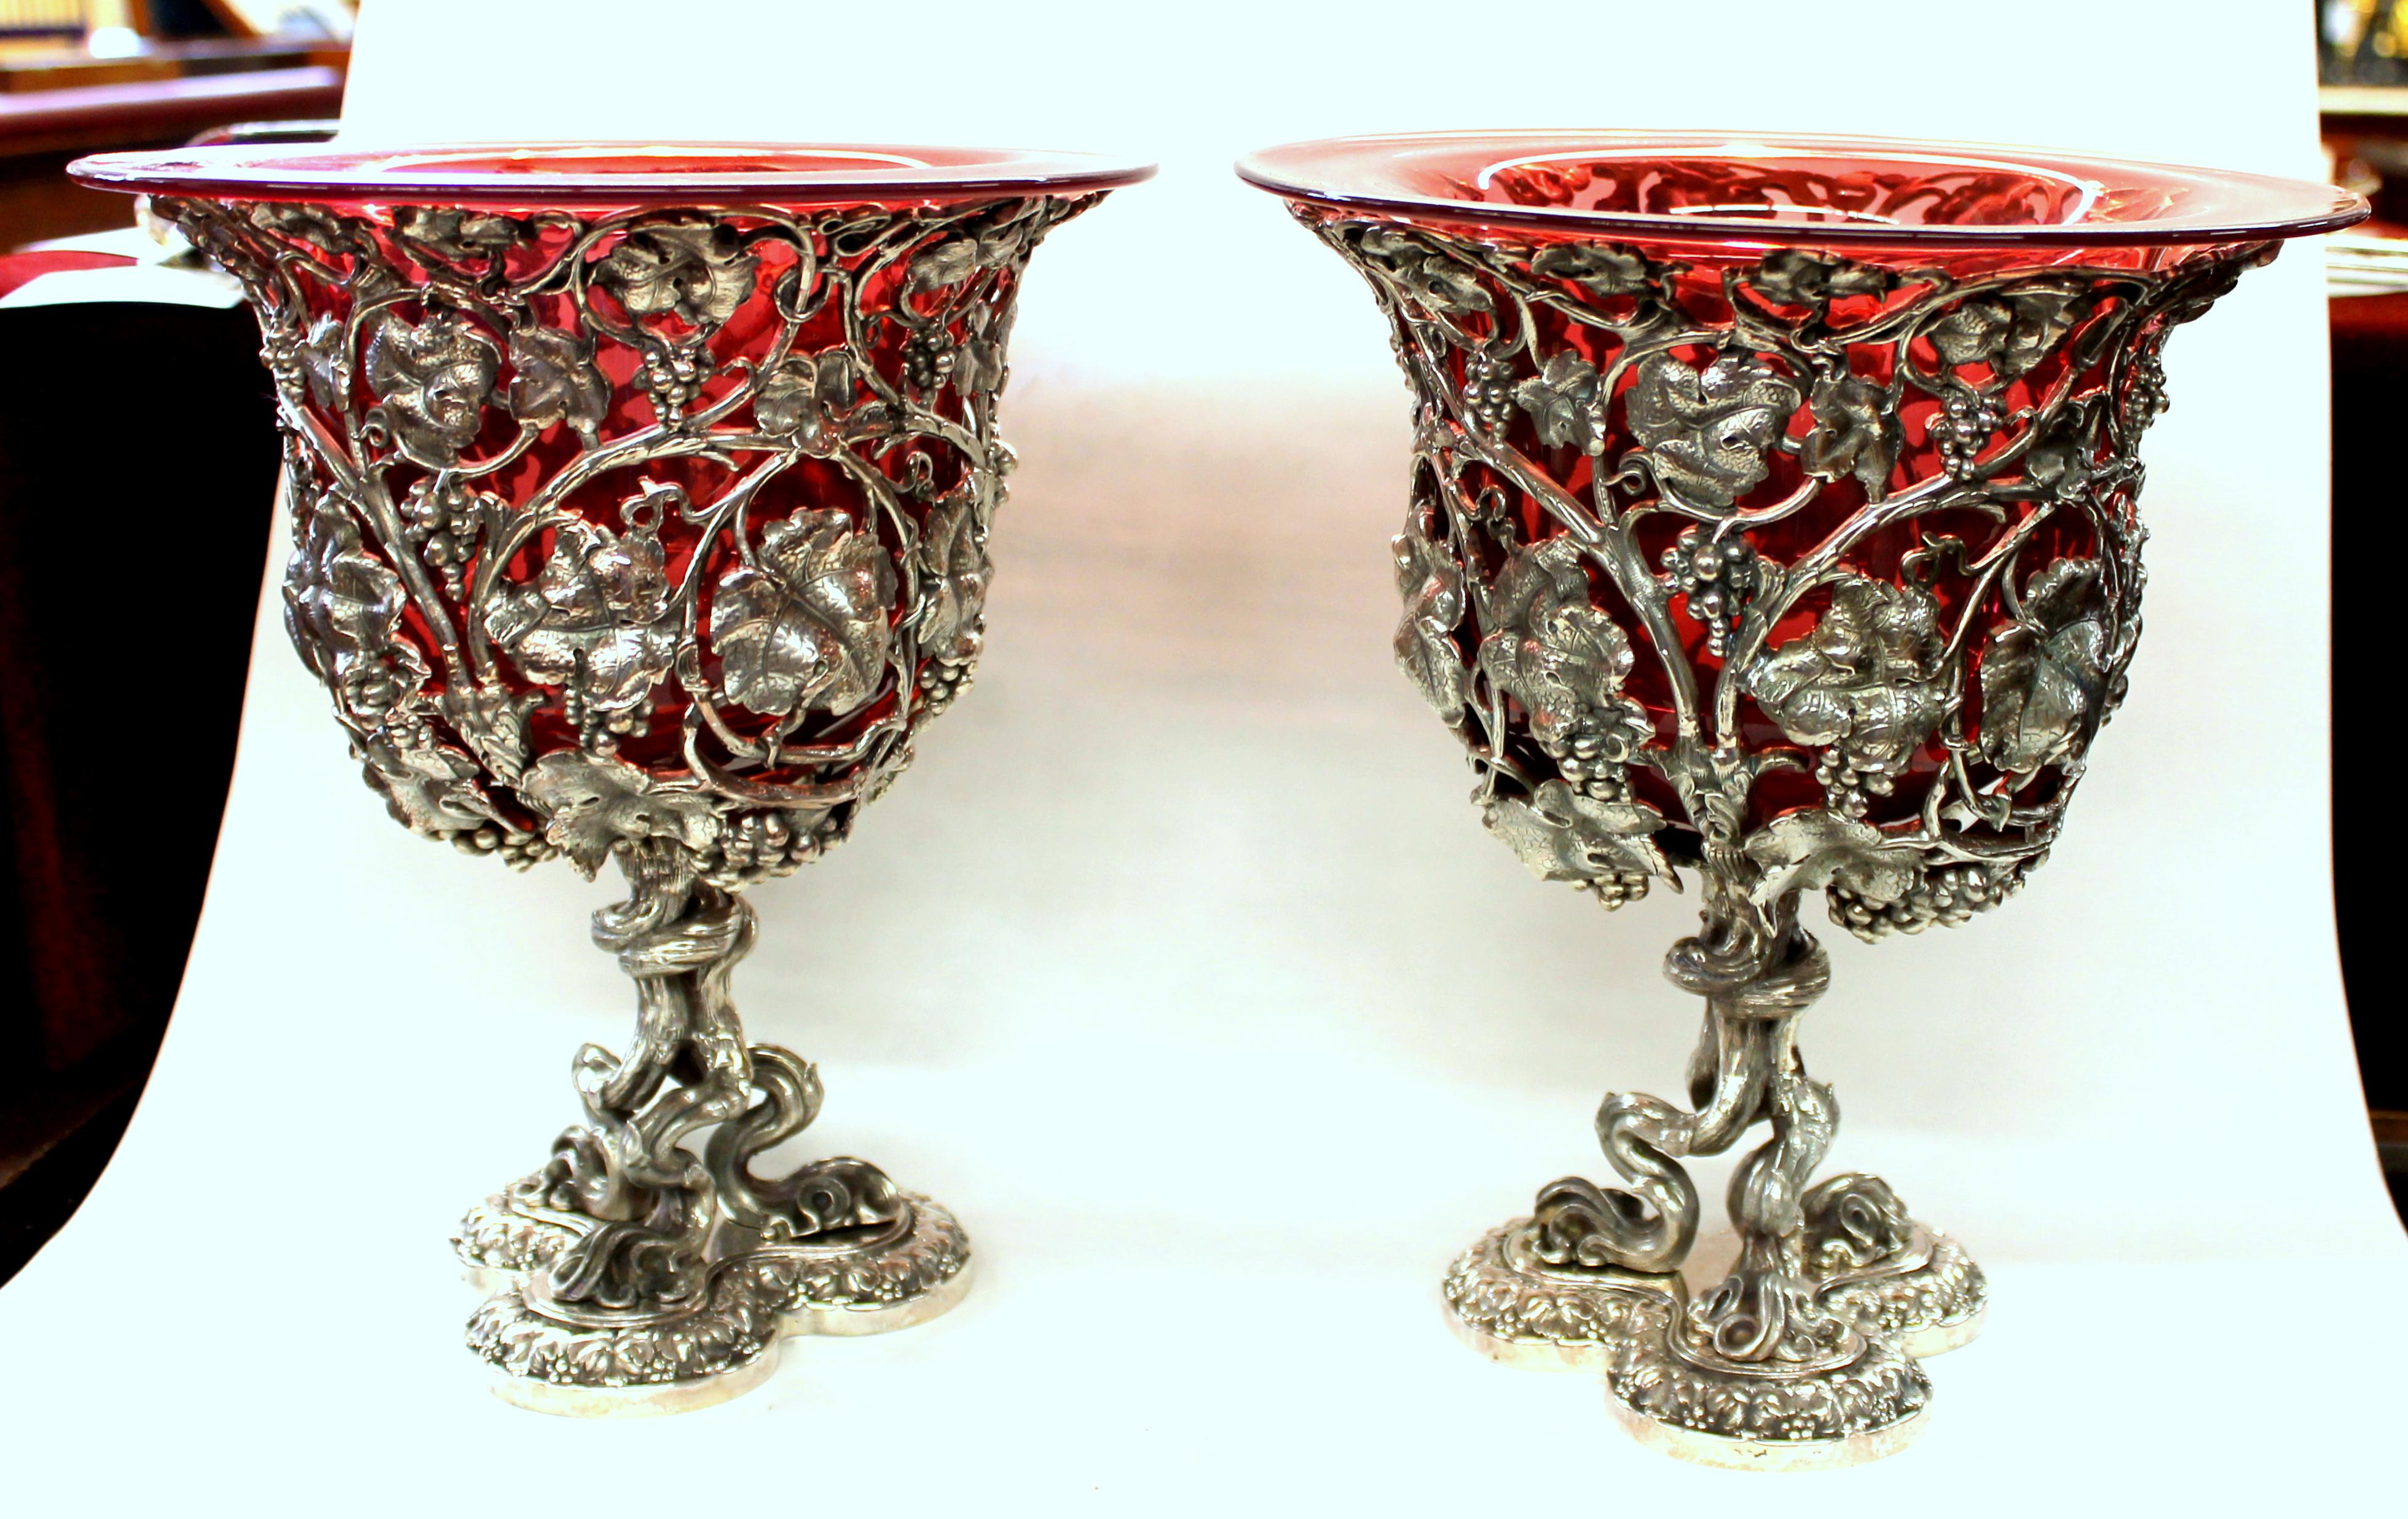 Pair of magnificent quality old reproduction Sheffield silver plate Rococo style wine coolers with original mouth blown cranberry crystal liners. Please note the exceptional 